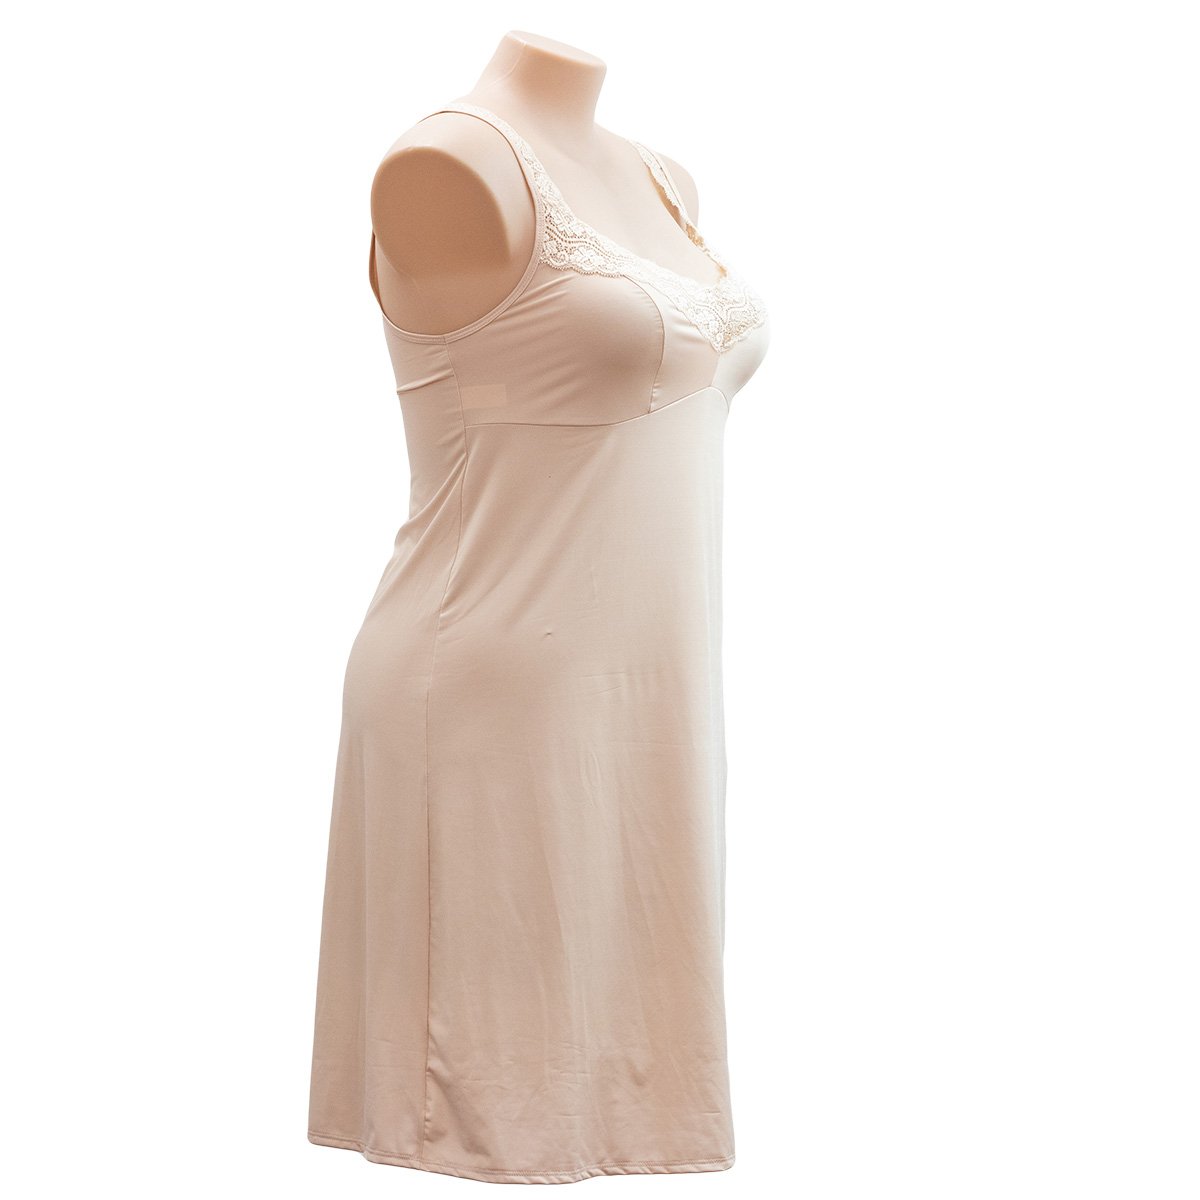 Essence Lace Trim Full Slip - Dresses & Slips  Available at Illusions Lingerie